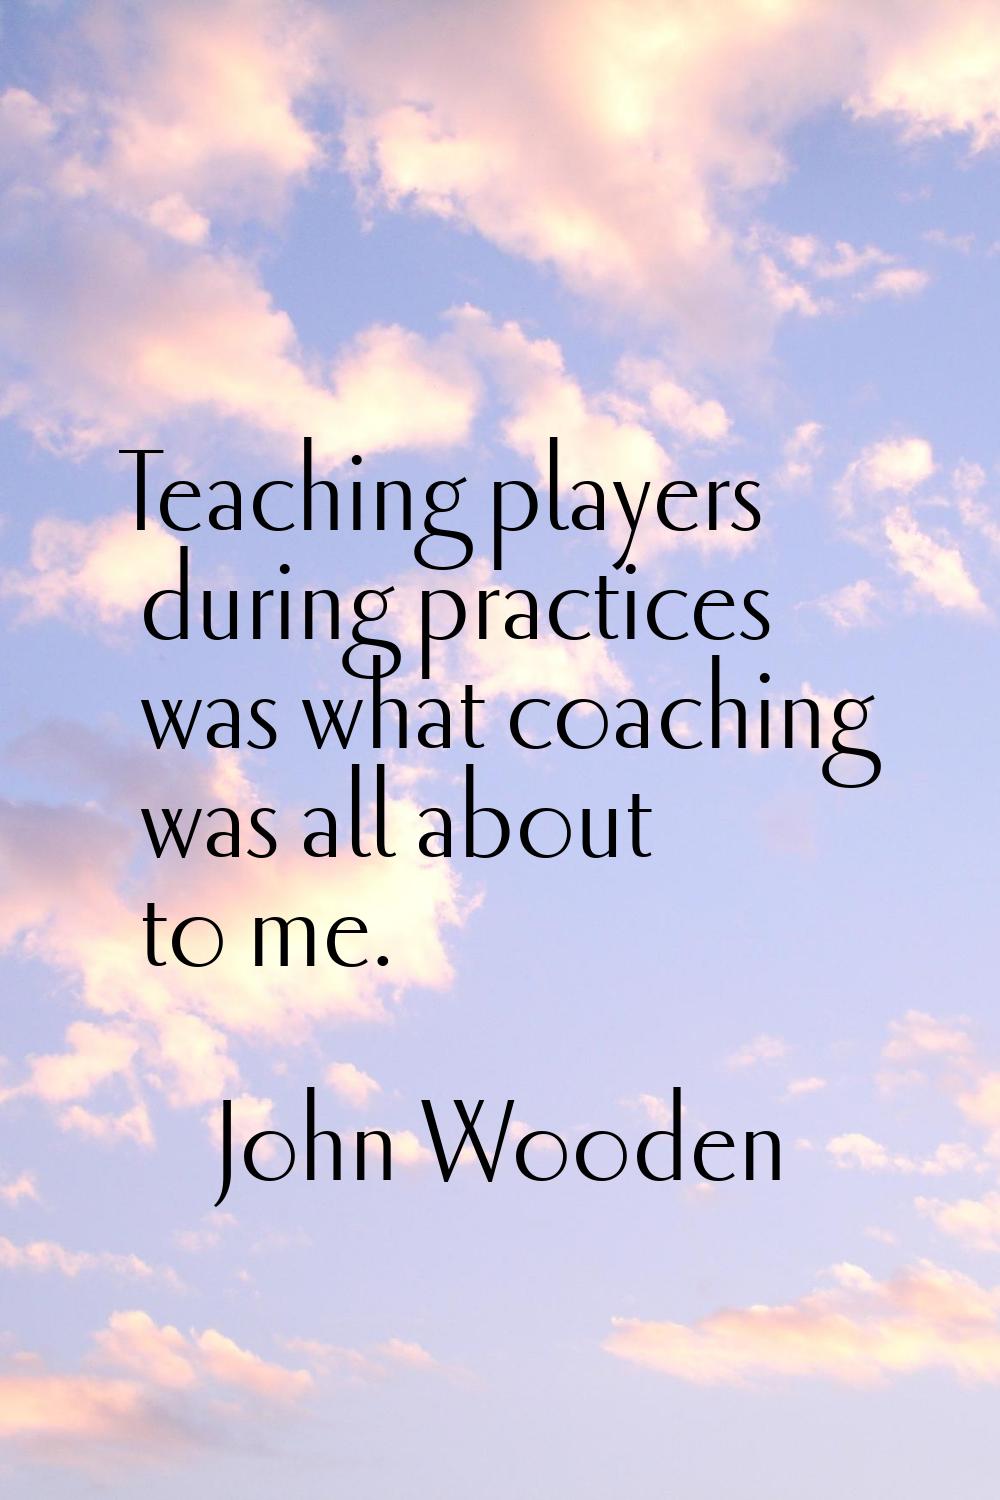 Teaching players during practices was what coaching was all about to me.